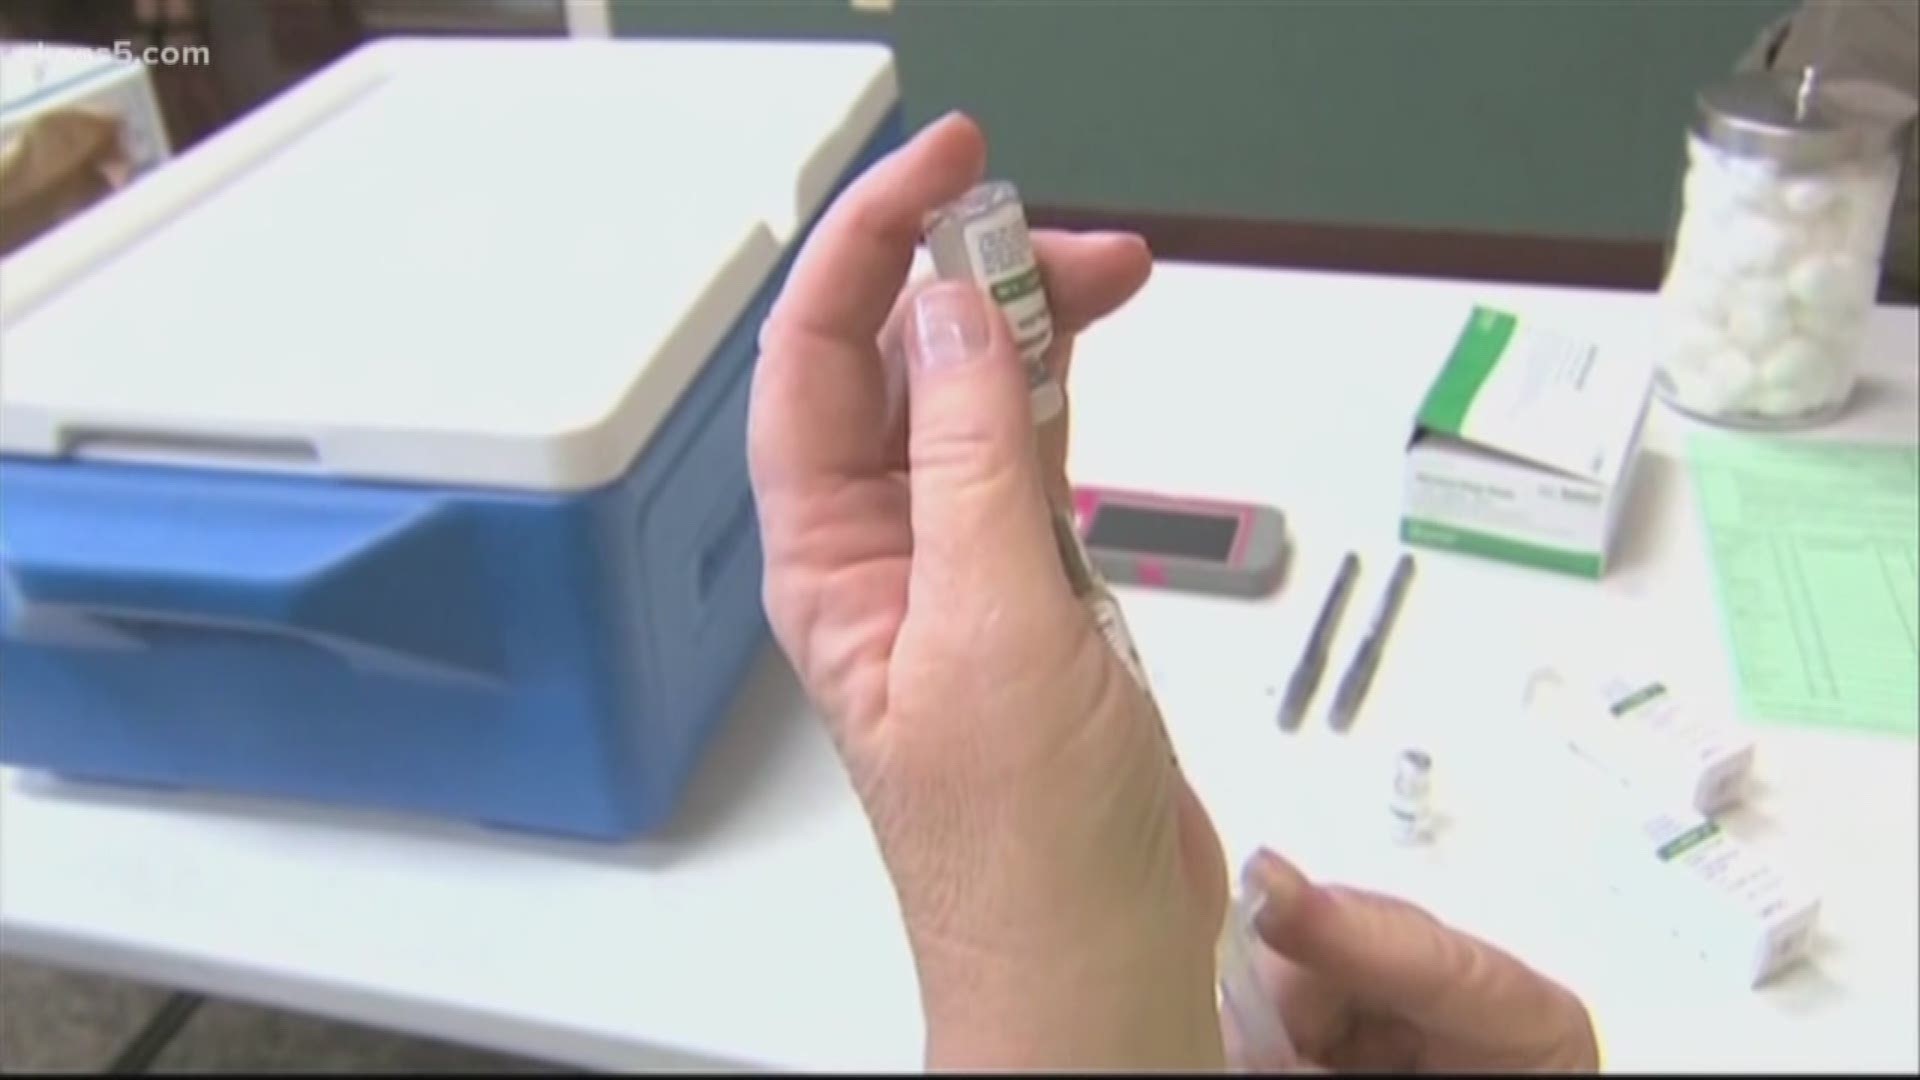 It's almost time for kids to head back to school. The UT Health School of Nursing is helping parents make sure their kids are up to date on vaccinations.